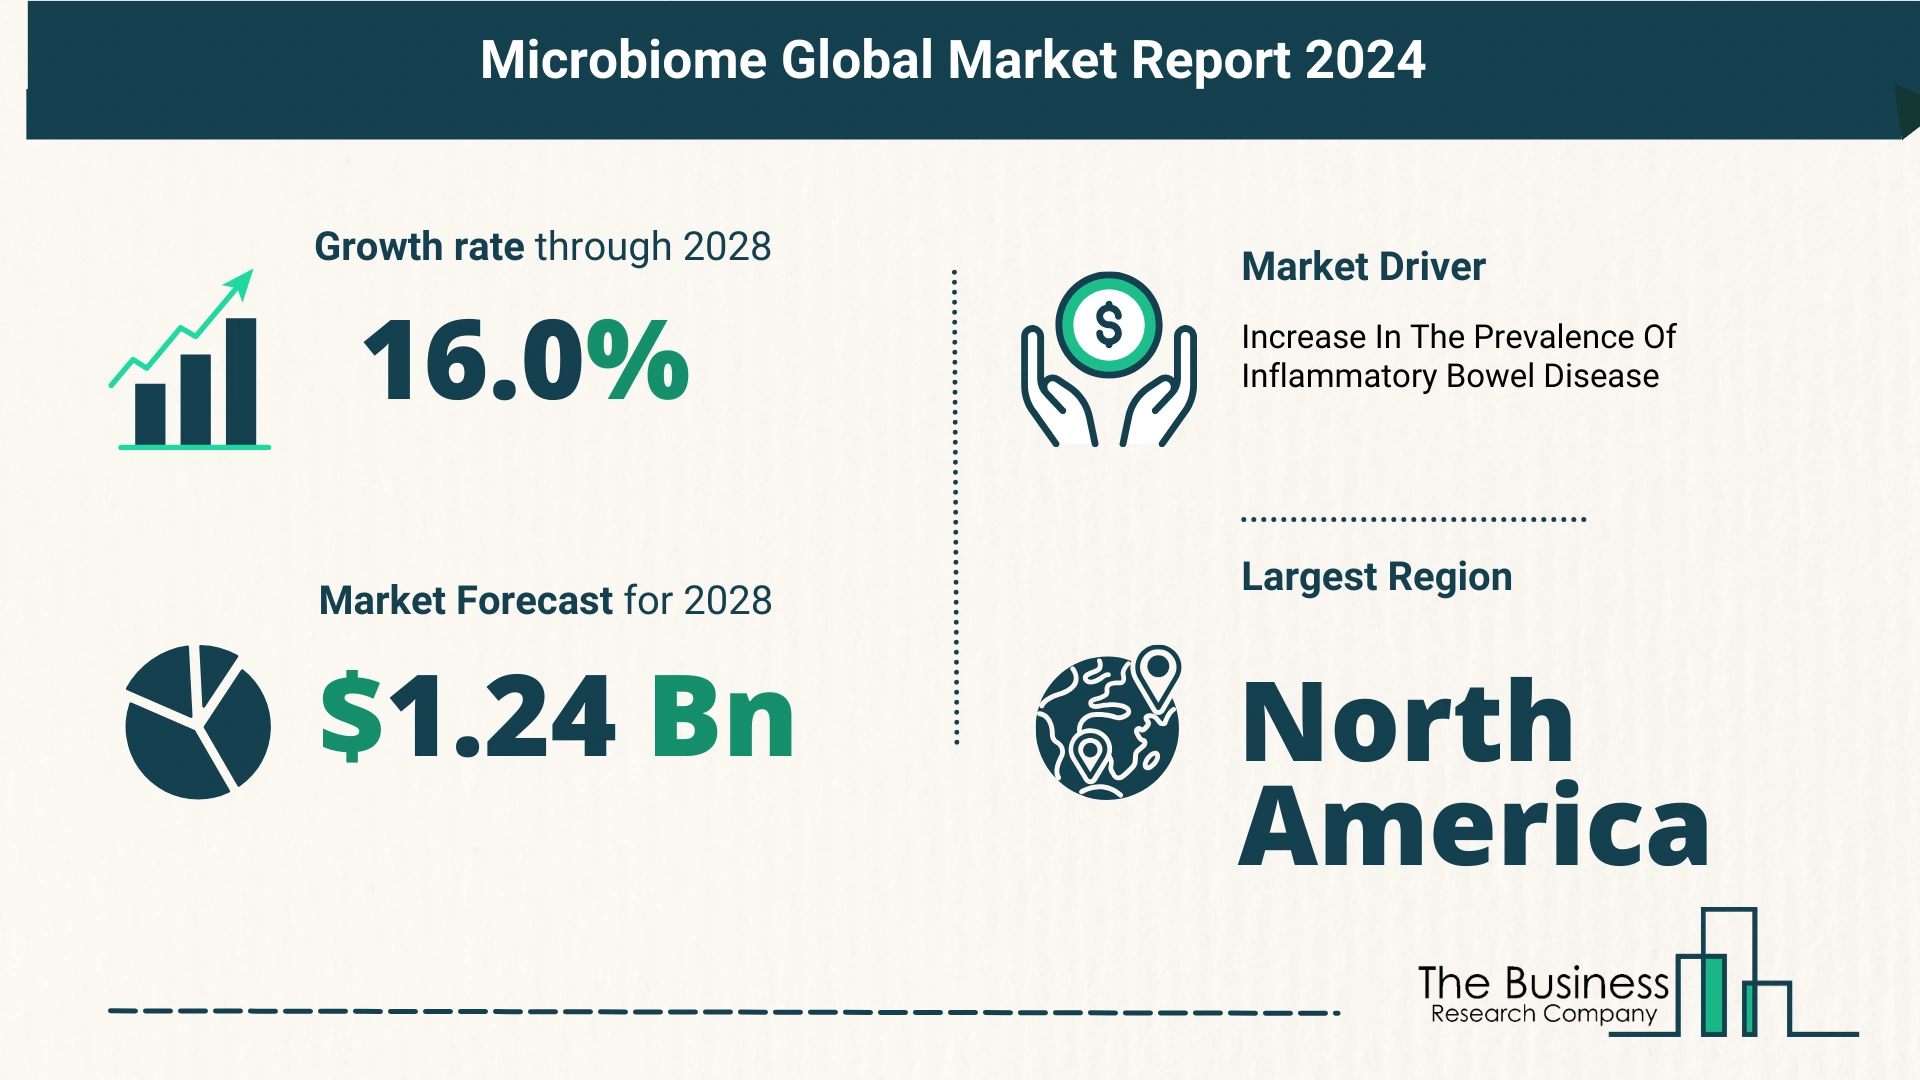 Top 5 Insights From The Microbiome Market Report 2024